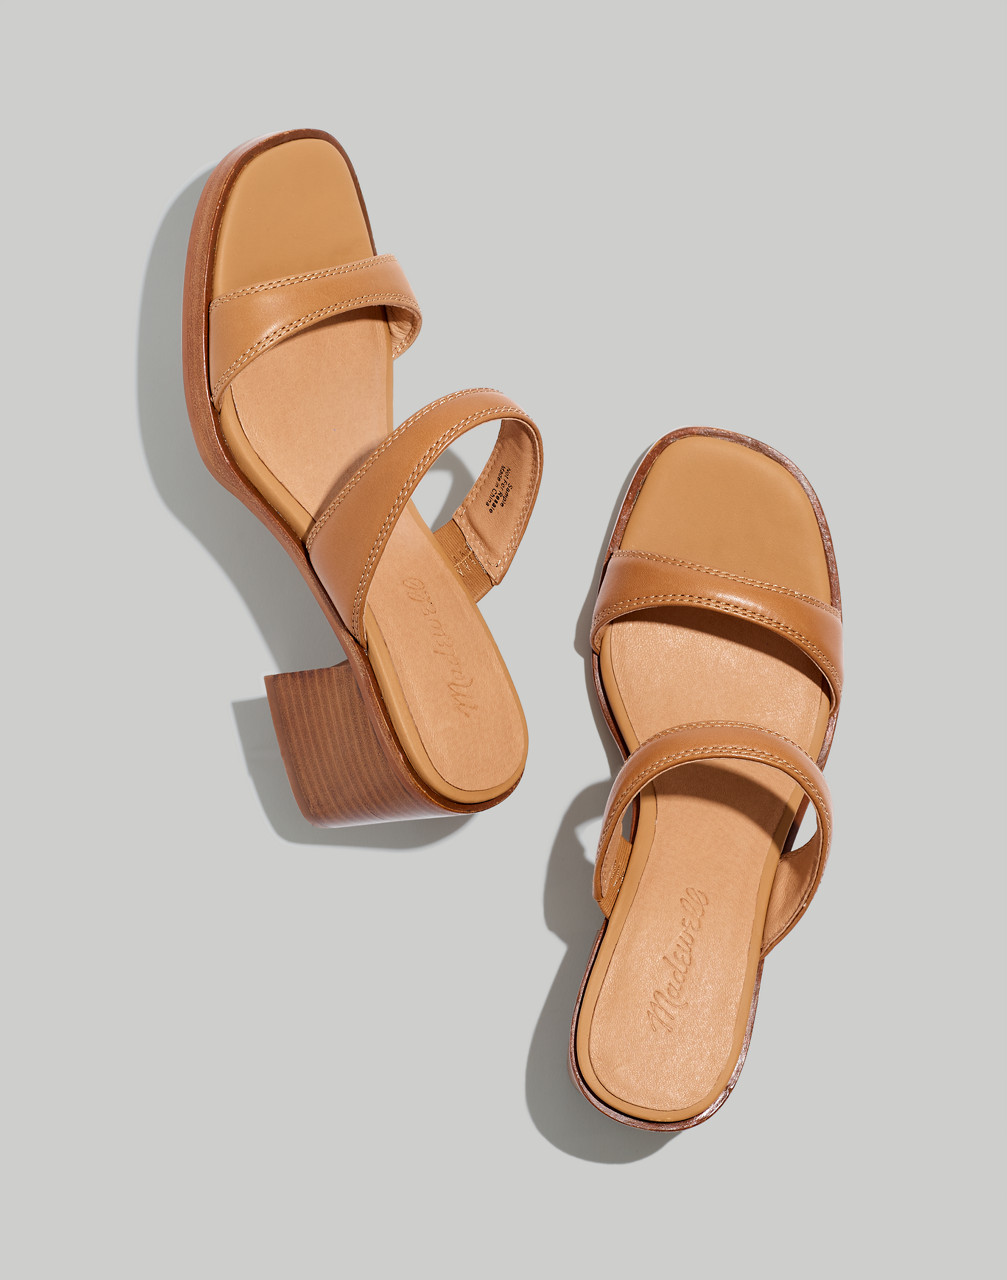 Mw The Saige Double-strap Sandal In Desert Camel